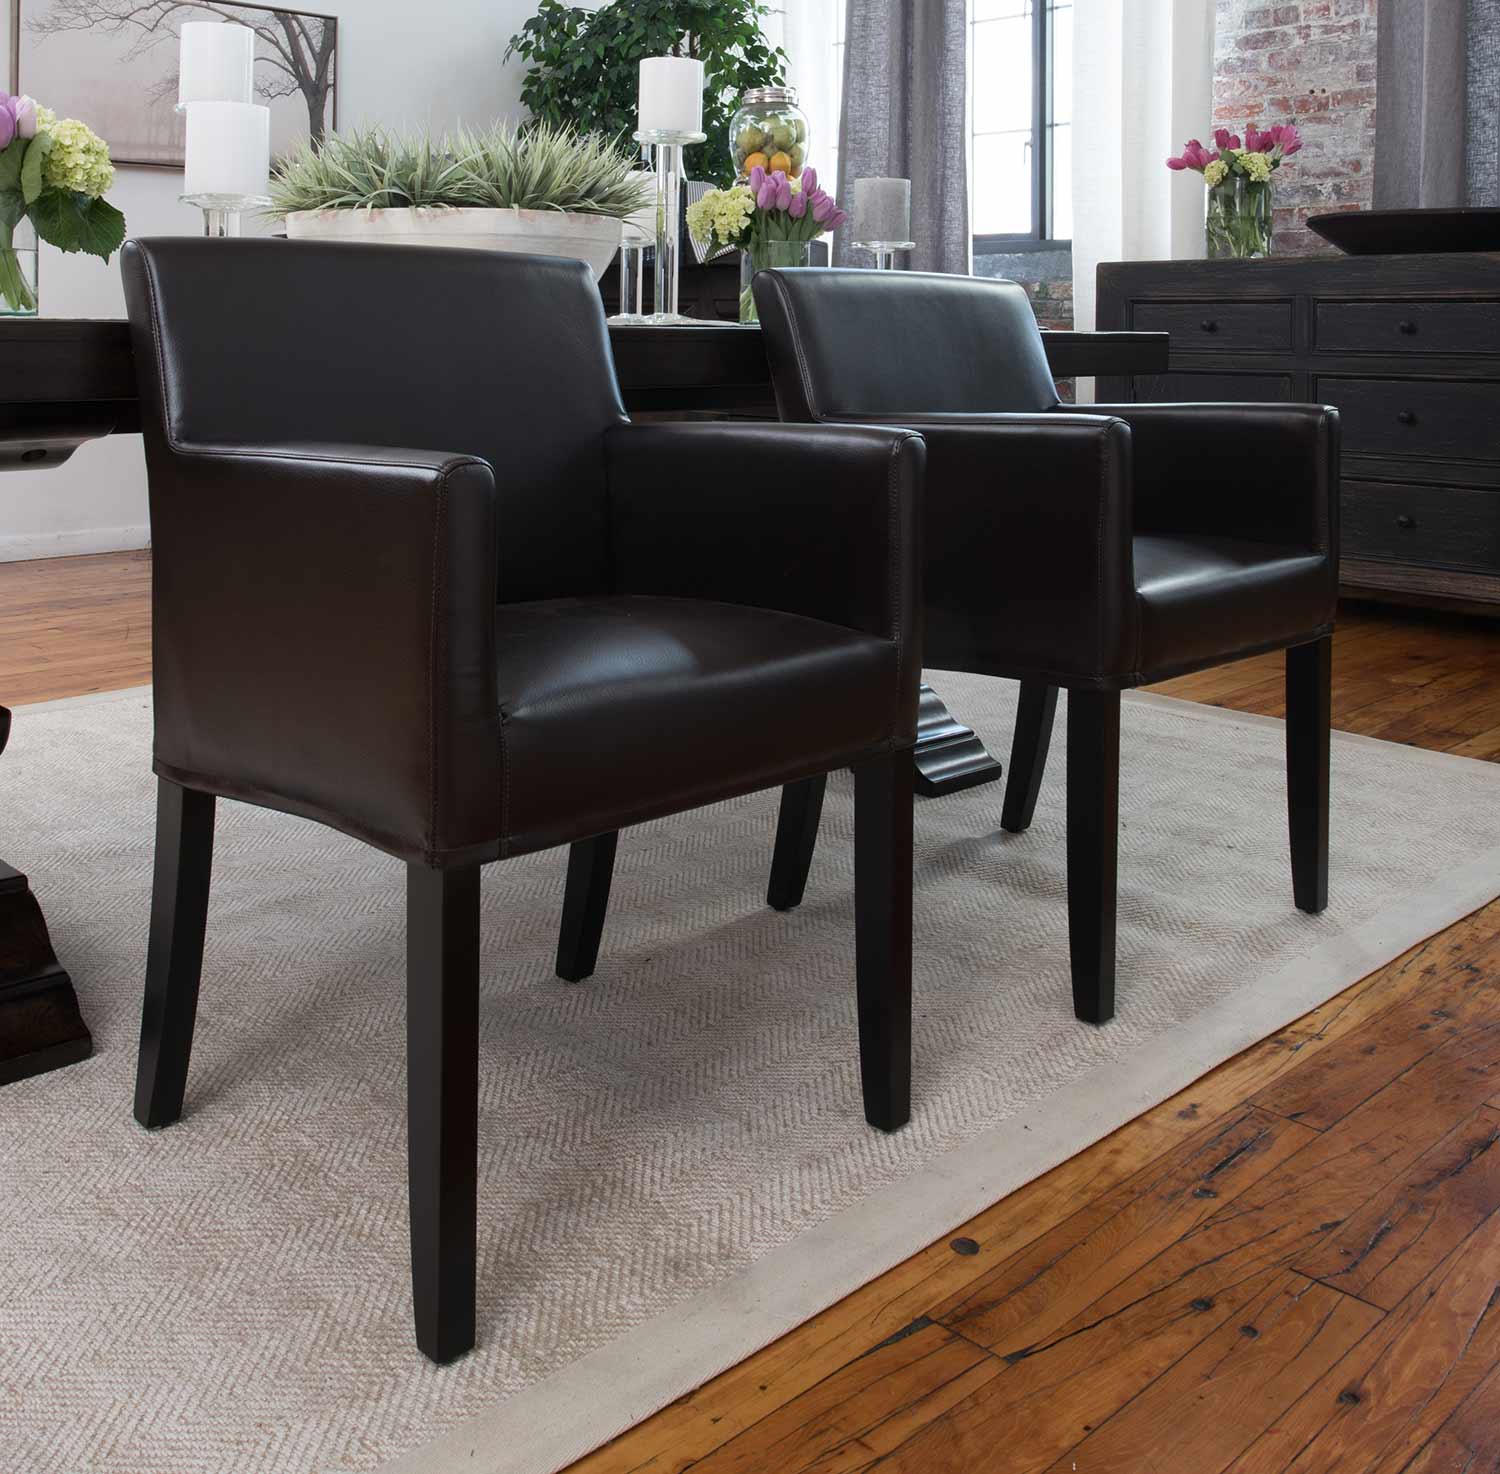 ELEMENTS Fine Home Furnishings Studio 2-Piece Dining Chairs - Truffle